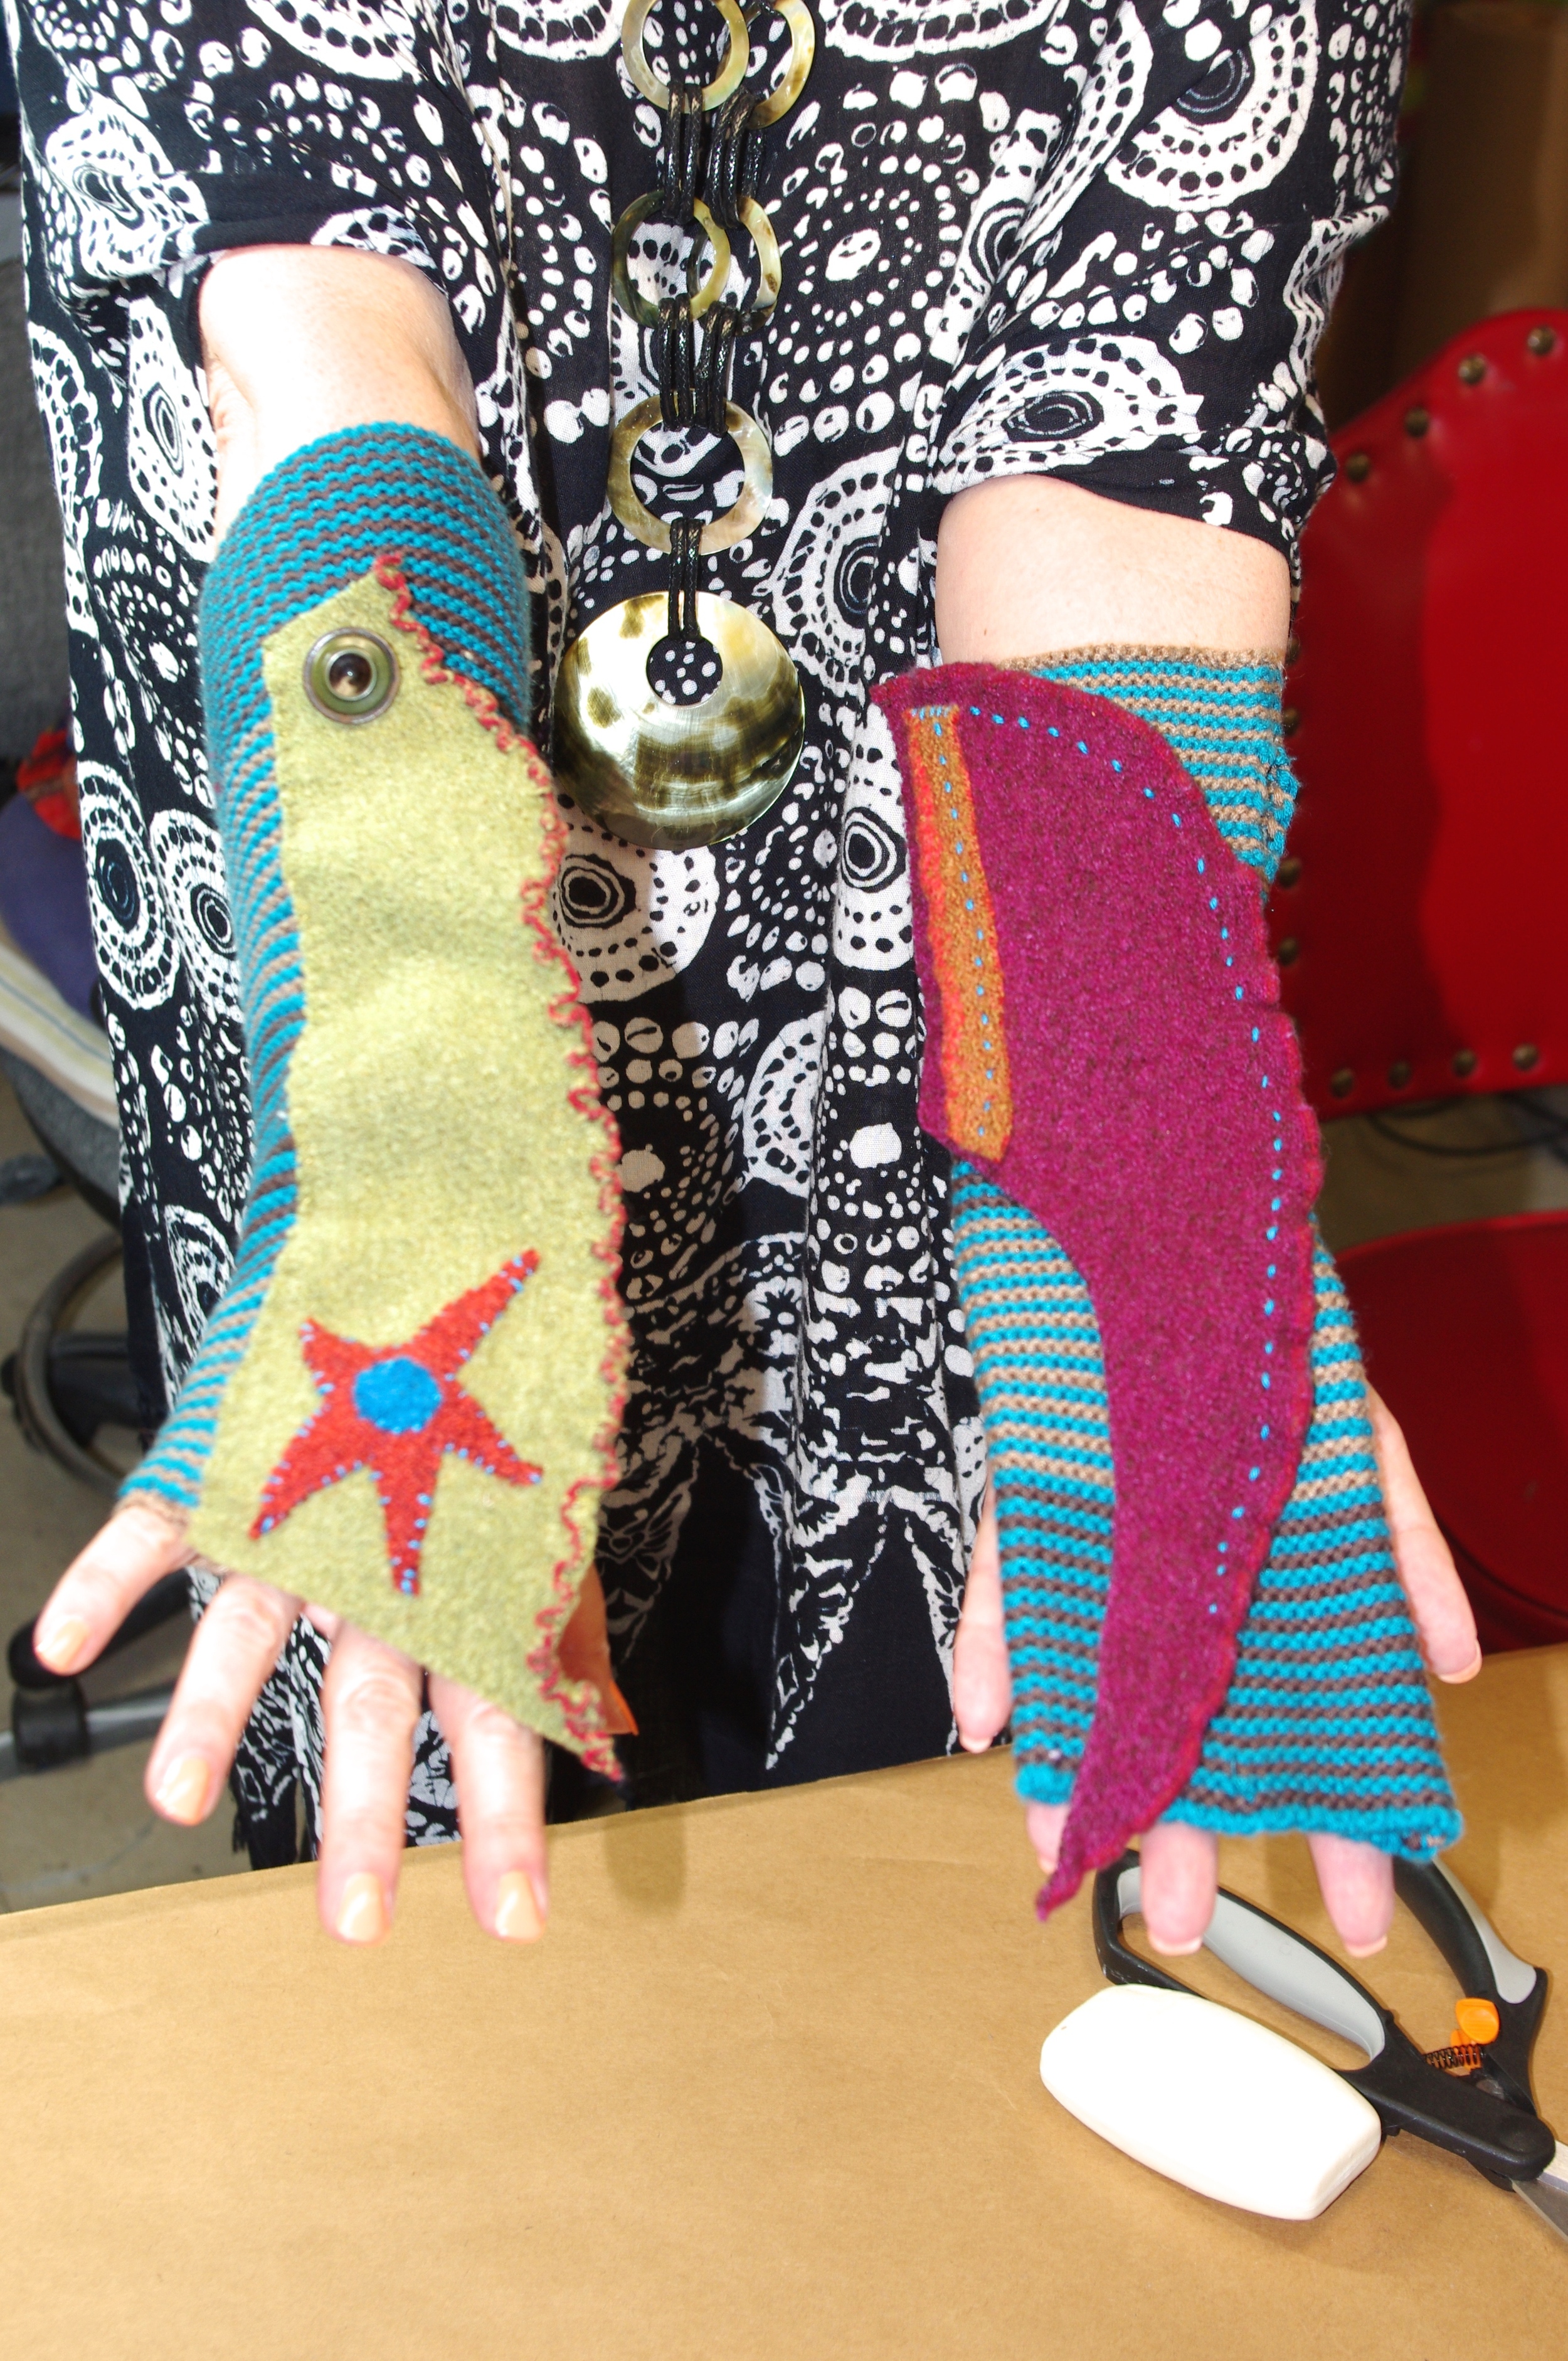 Fingerless gloves completed in the 3 hour, sewing workshop.